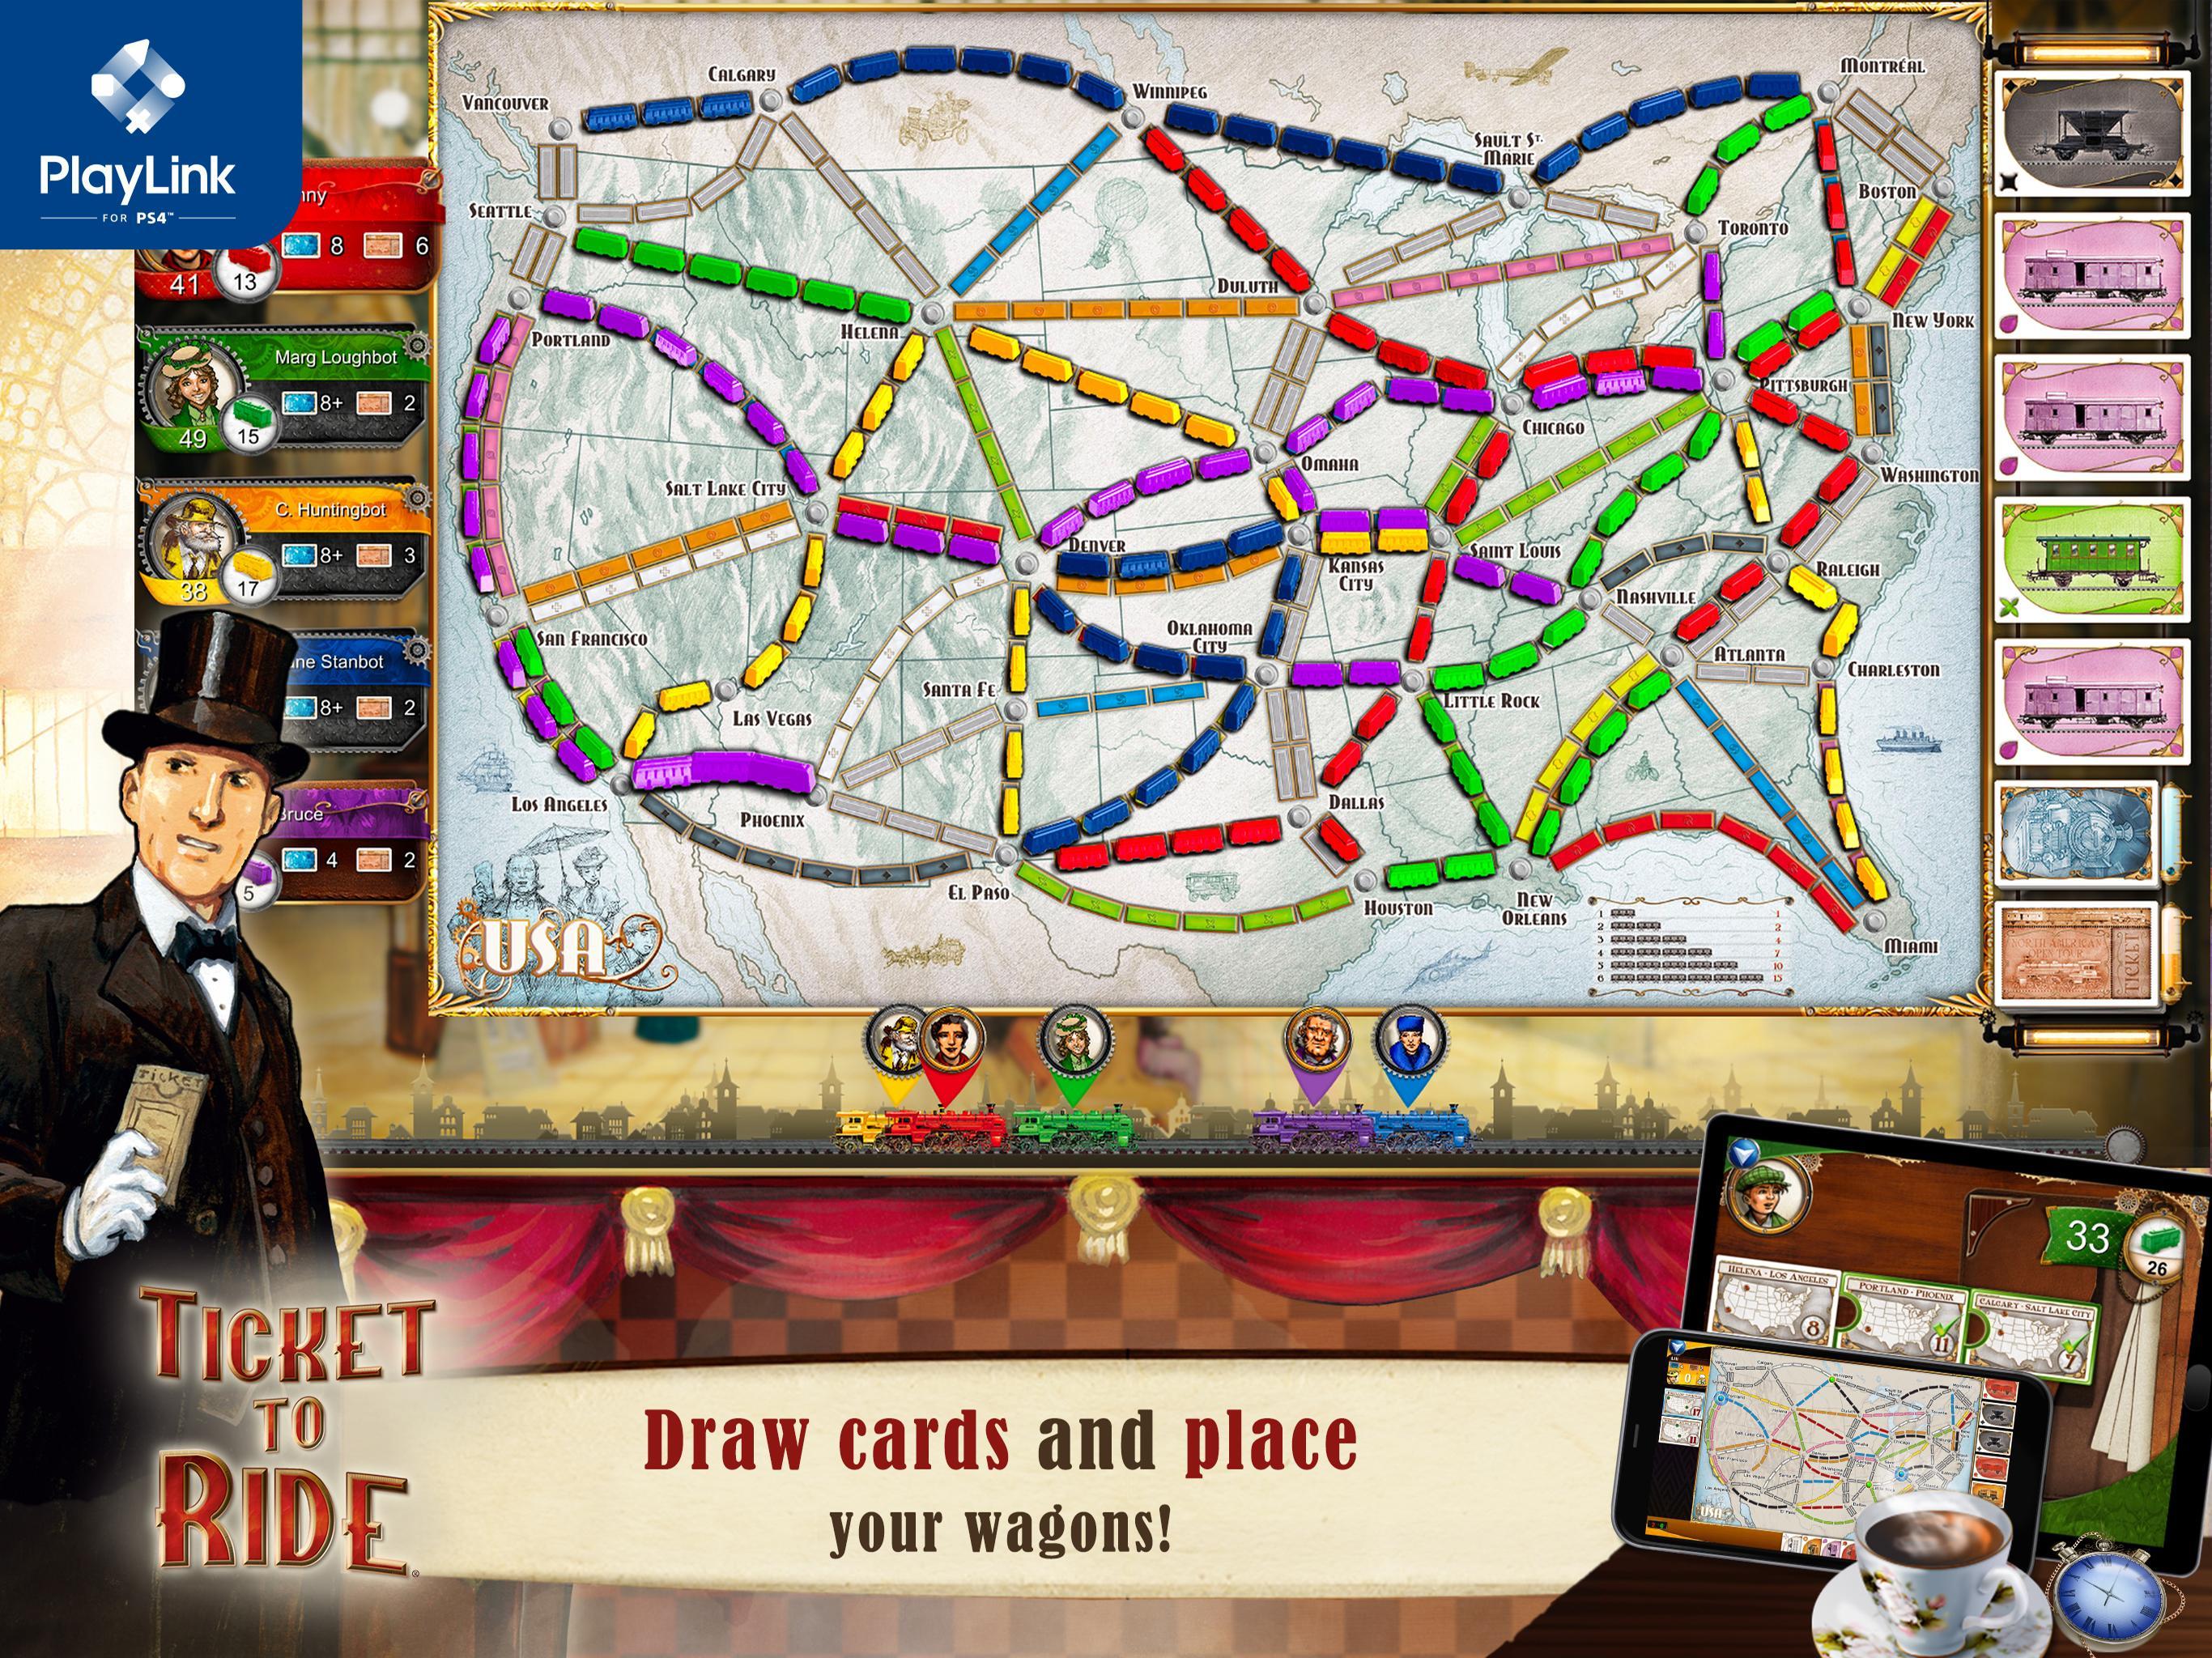 Ticket to Ride for PlayLink 2.7.2-6472-ceb1ea16 Screenshot 8